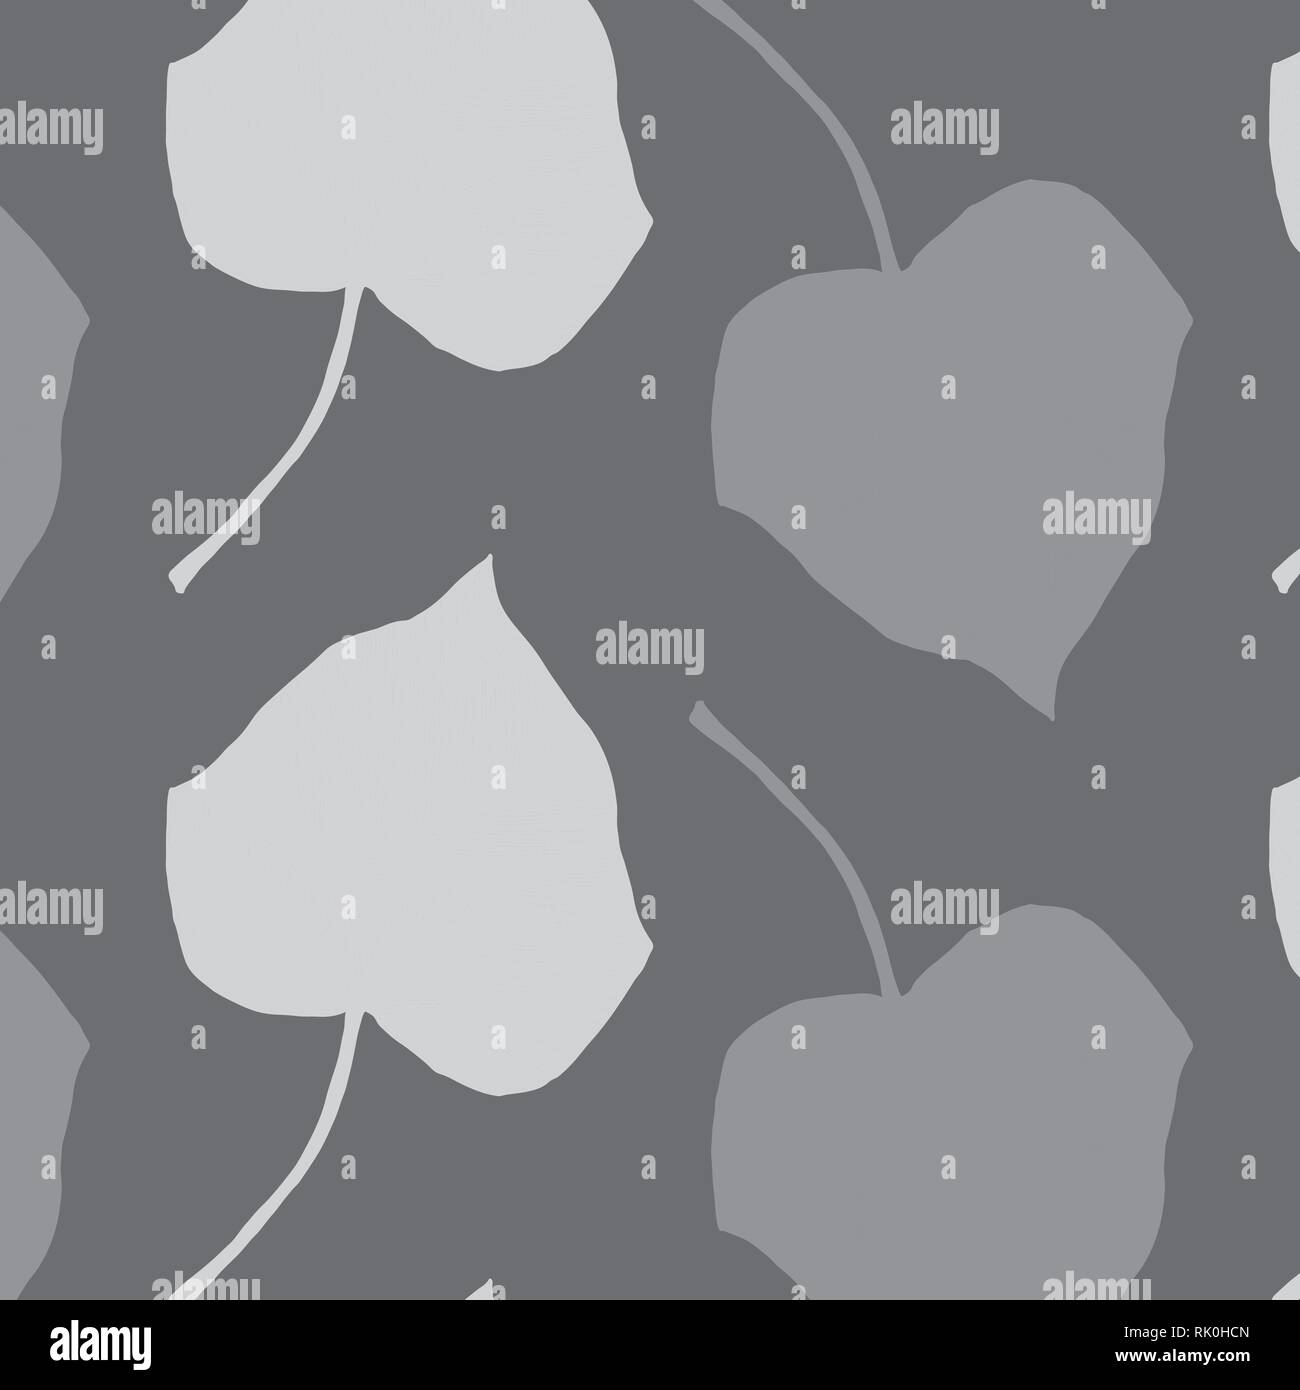 Ivy leaves silhouette vector pattern in gray colors palette Stock Vector